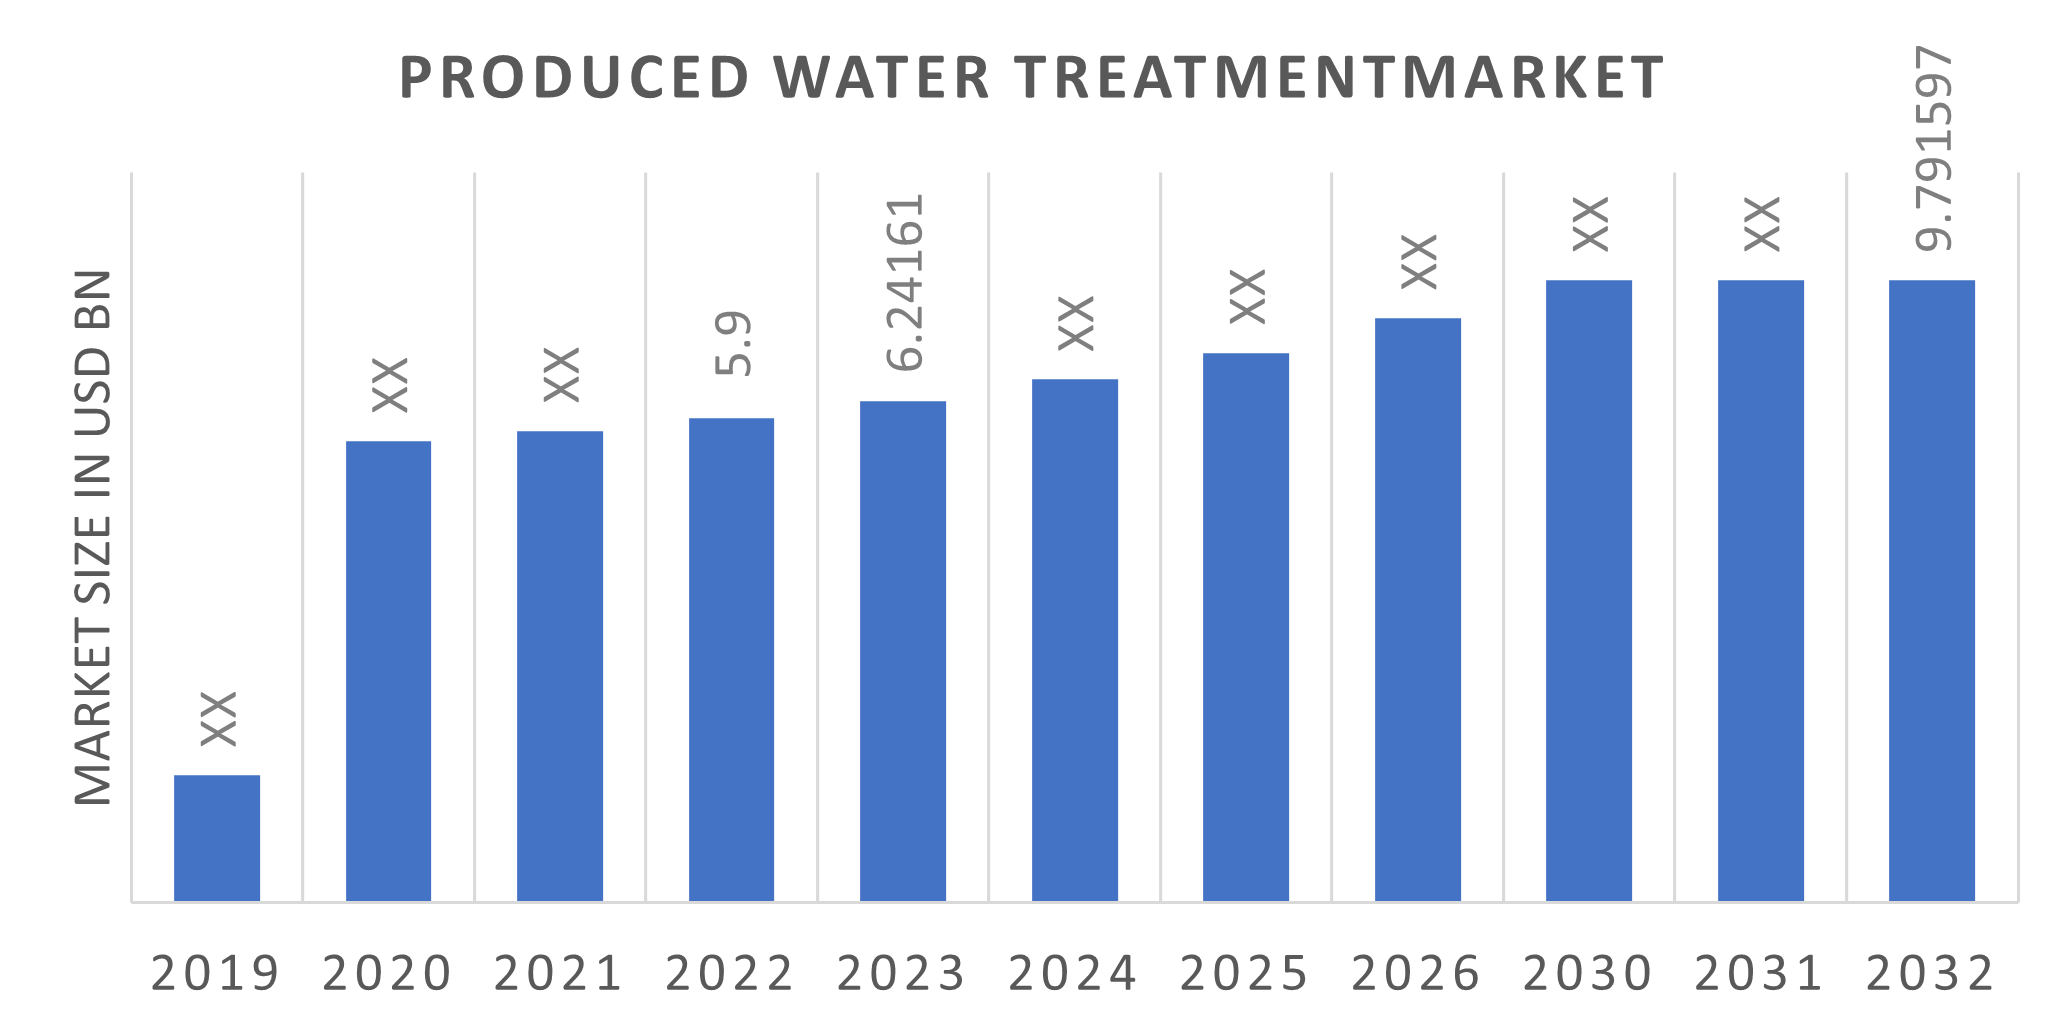 Global Produced Water Treatment Market Overview